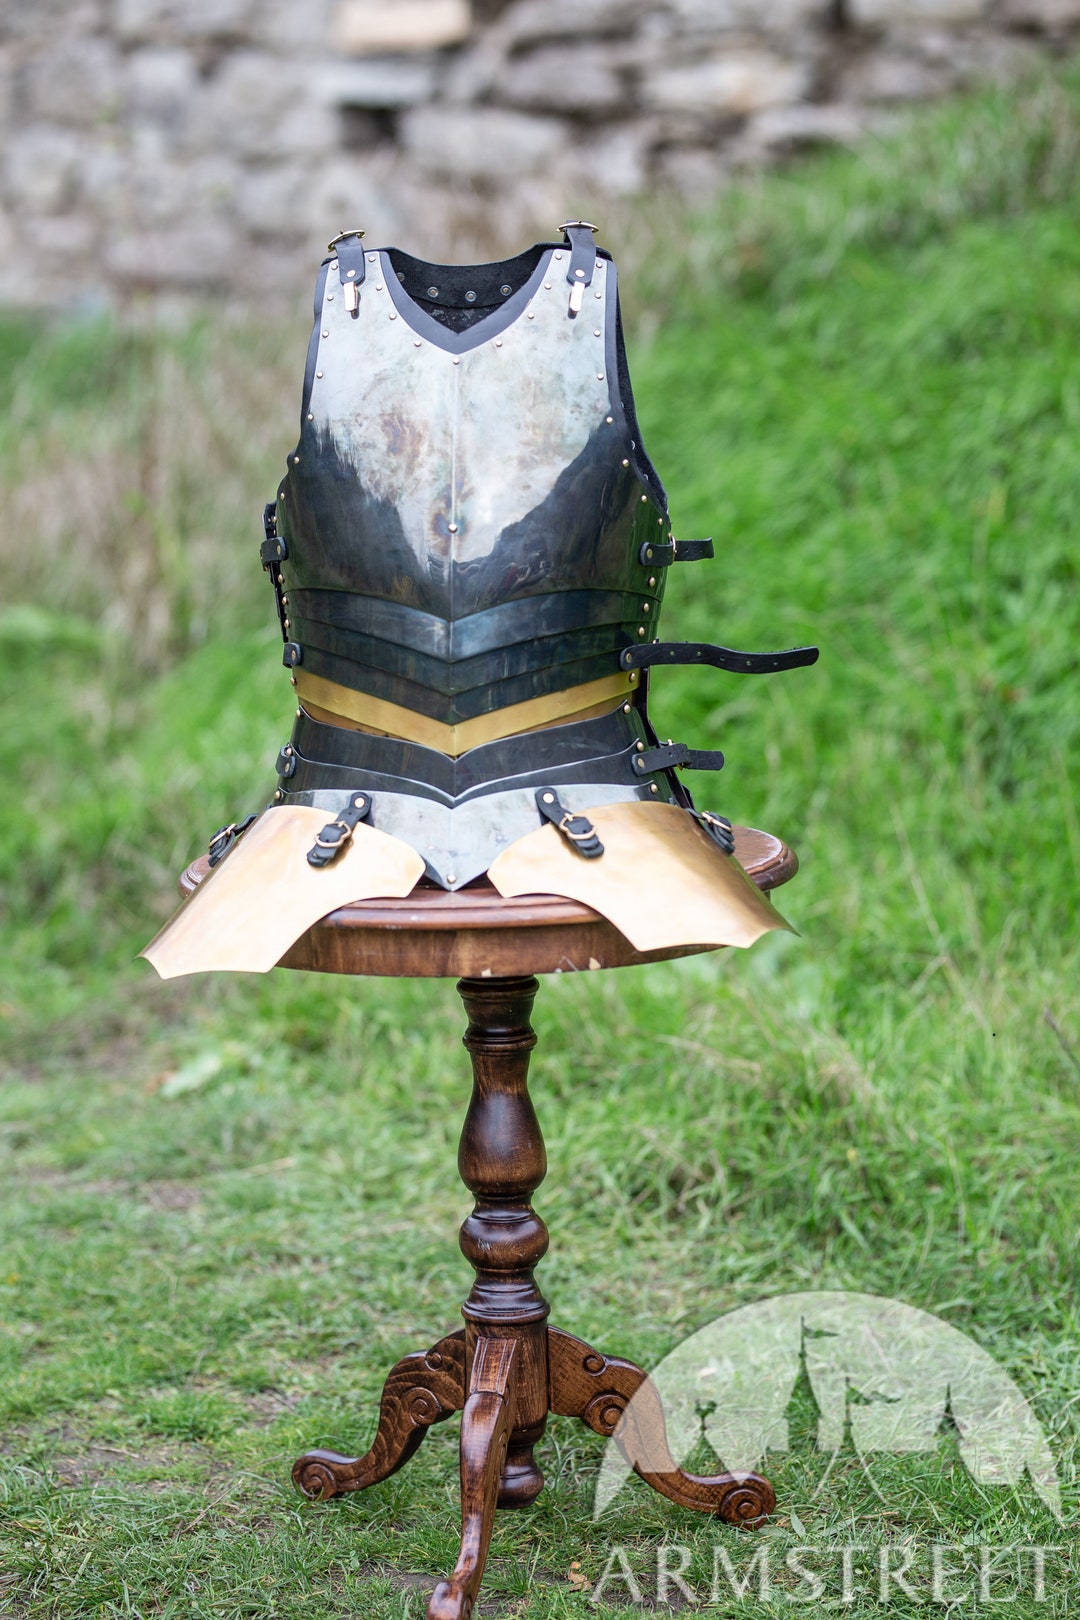 Female Blackened Spring Steel Cuirass With Tassets evening Star Breastplate  Chest Armor Spring Steel and Brass Armor -  Canada